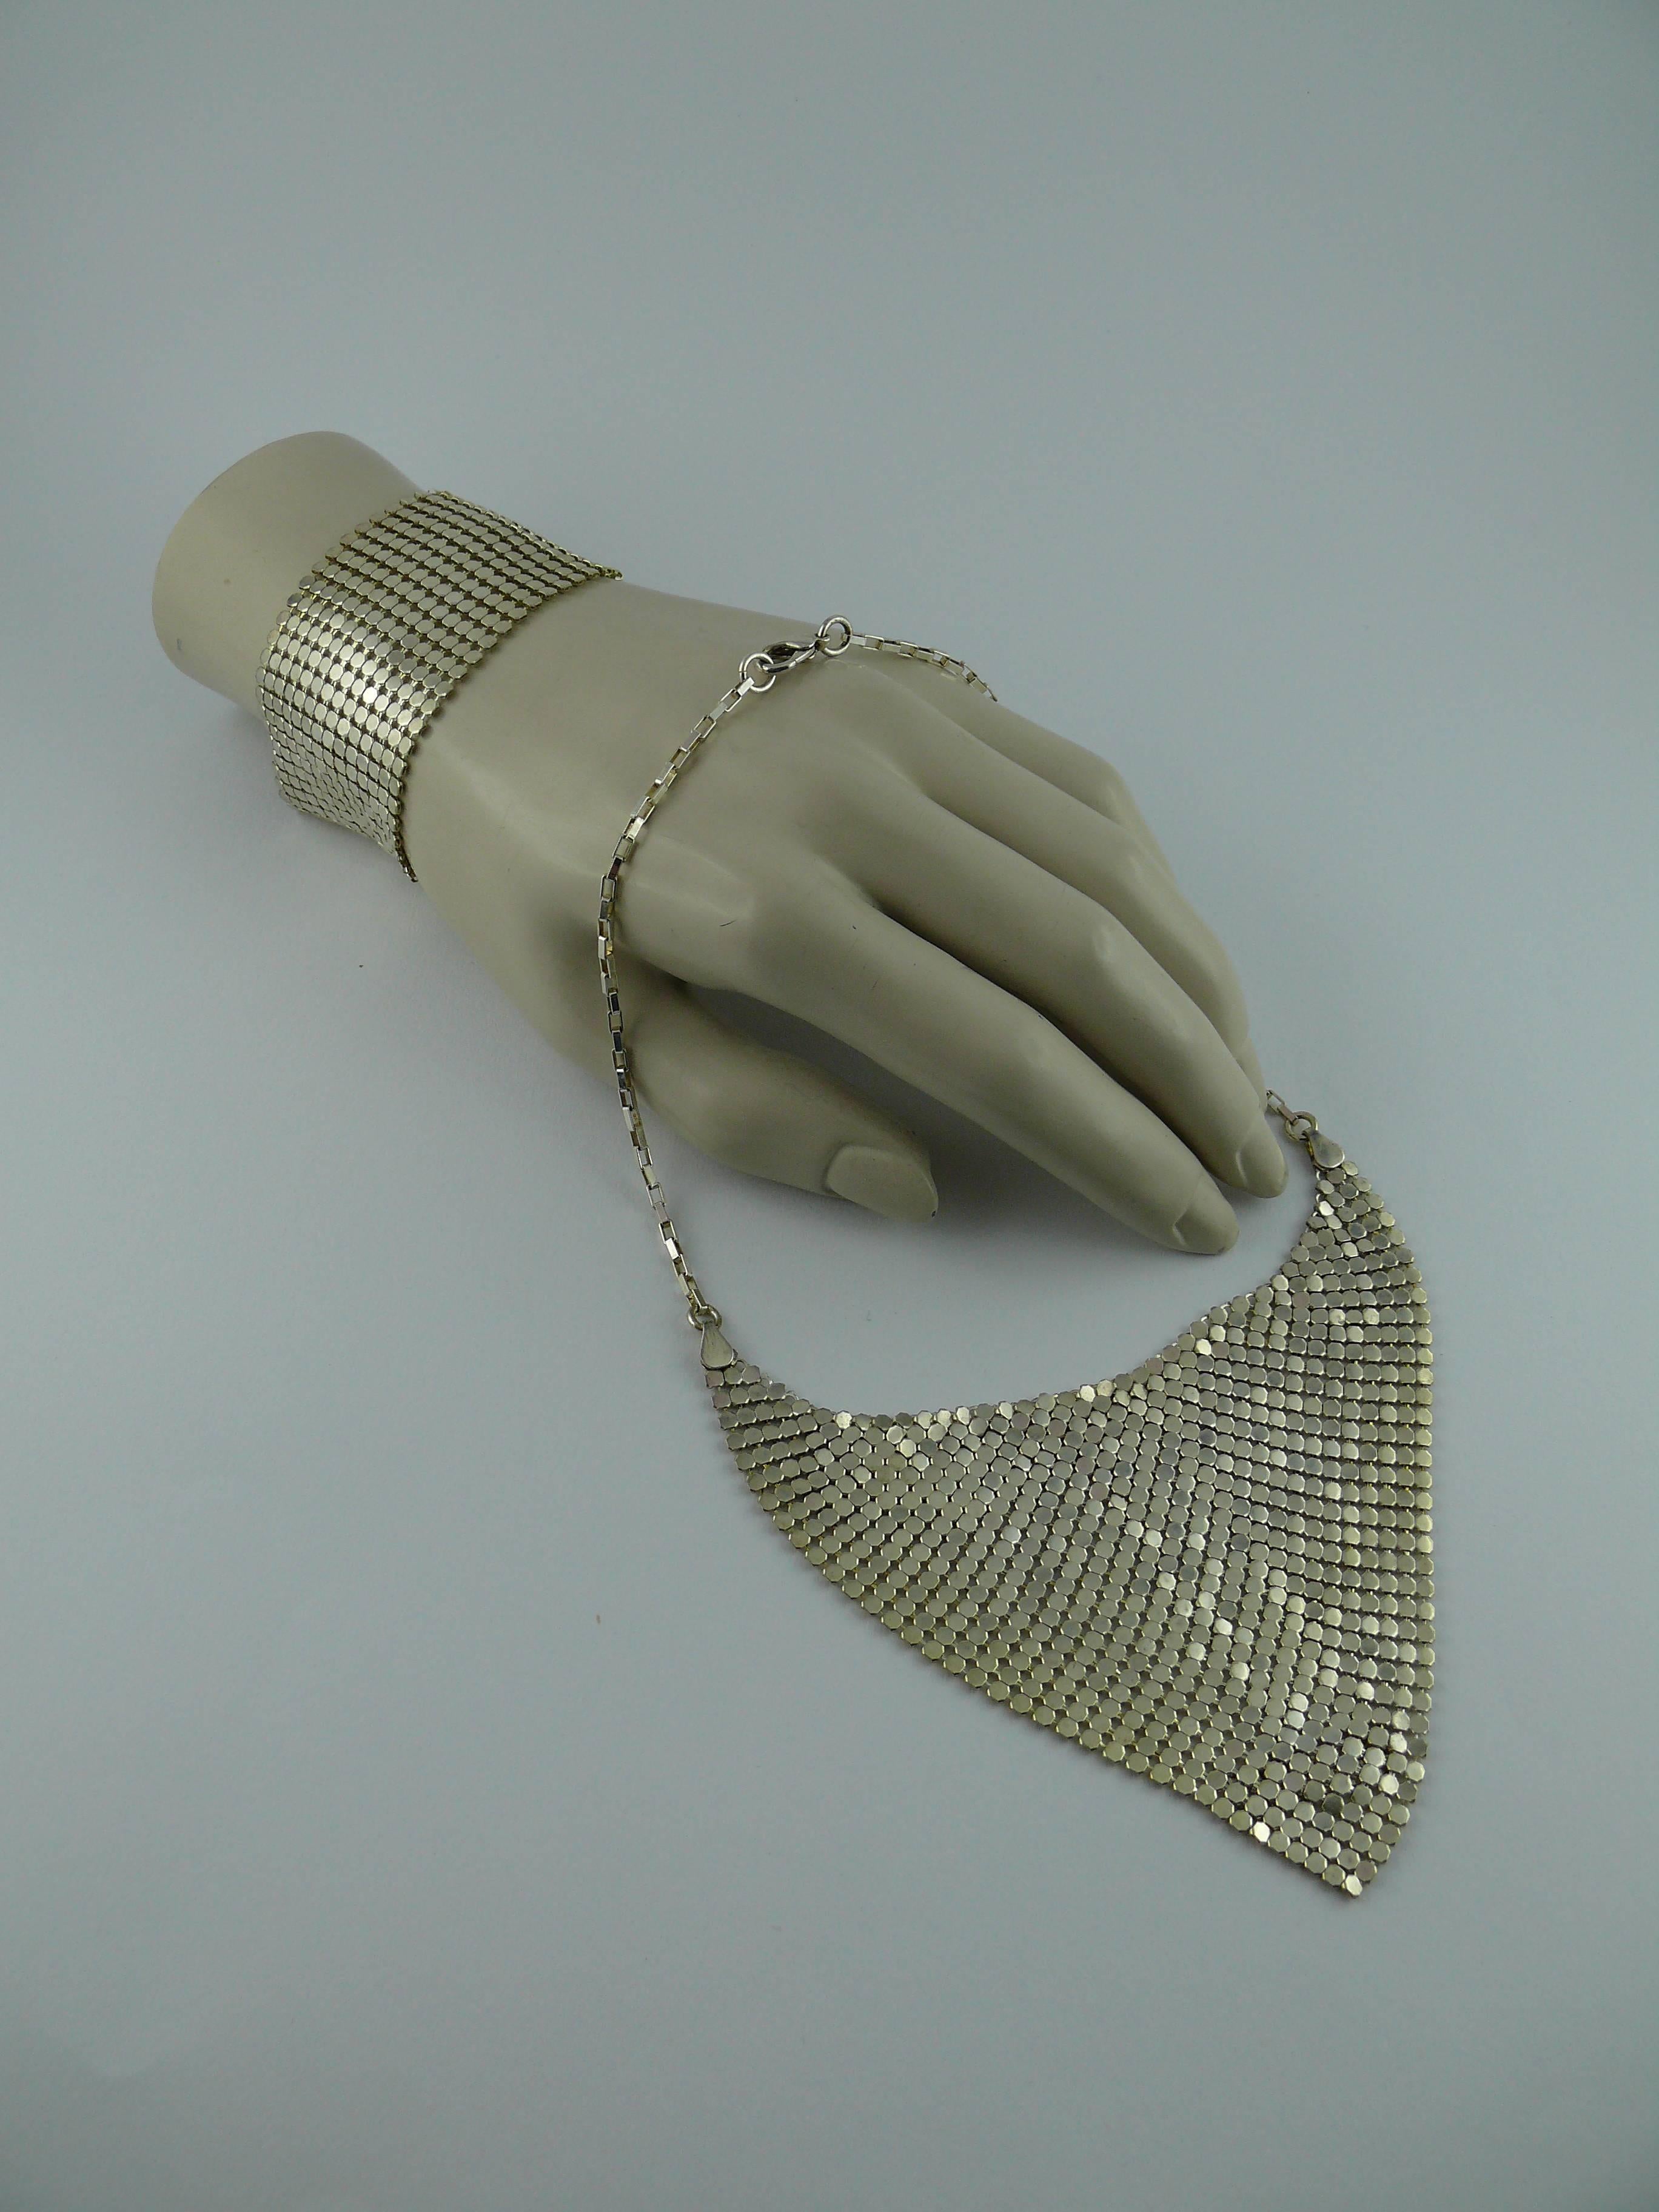 PACO RABANNE vintage disco silver tone mesh necklace and bracelet set.

Necklace is featuring a metal mesh triangle hanging on a silver tone rectangular link chain. It has a lobster closure.

Bracelet is made of 14 mesh strands and has a